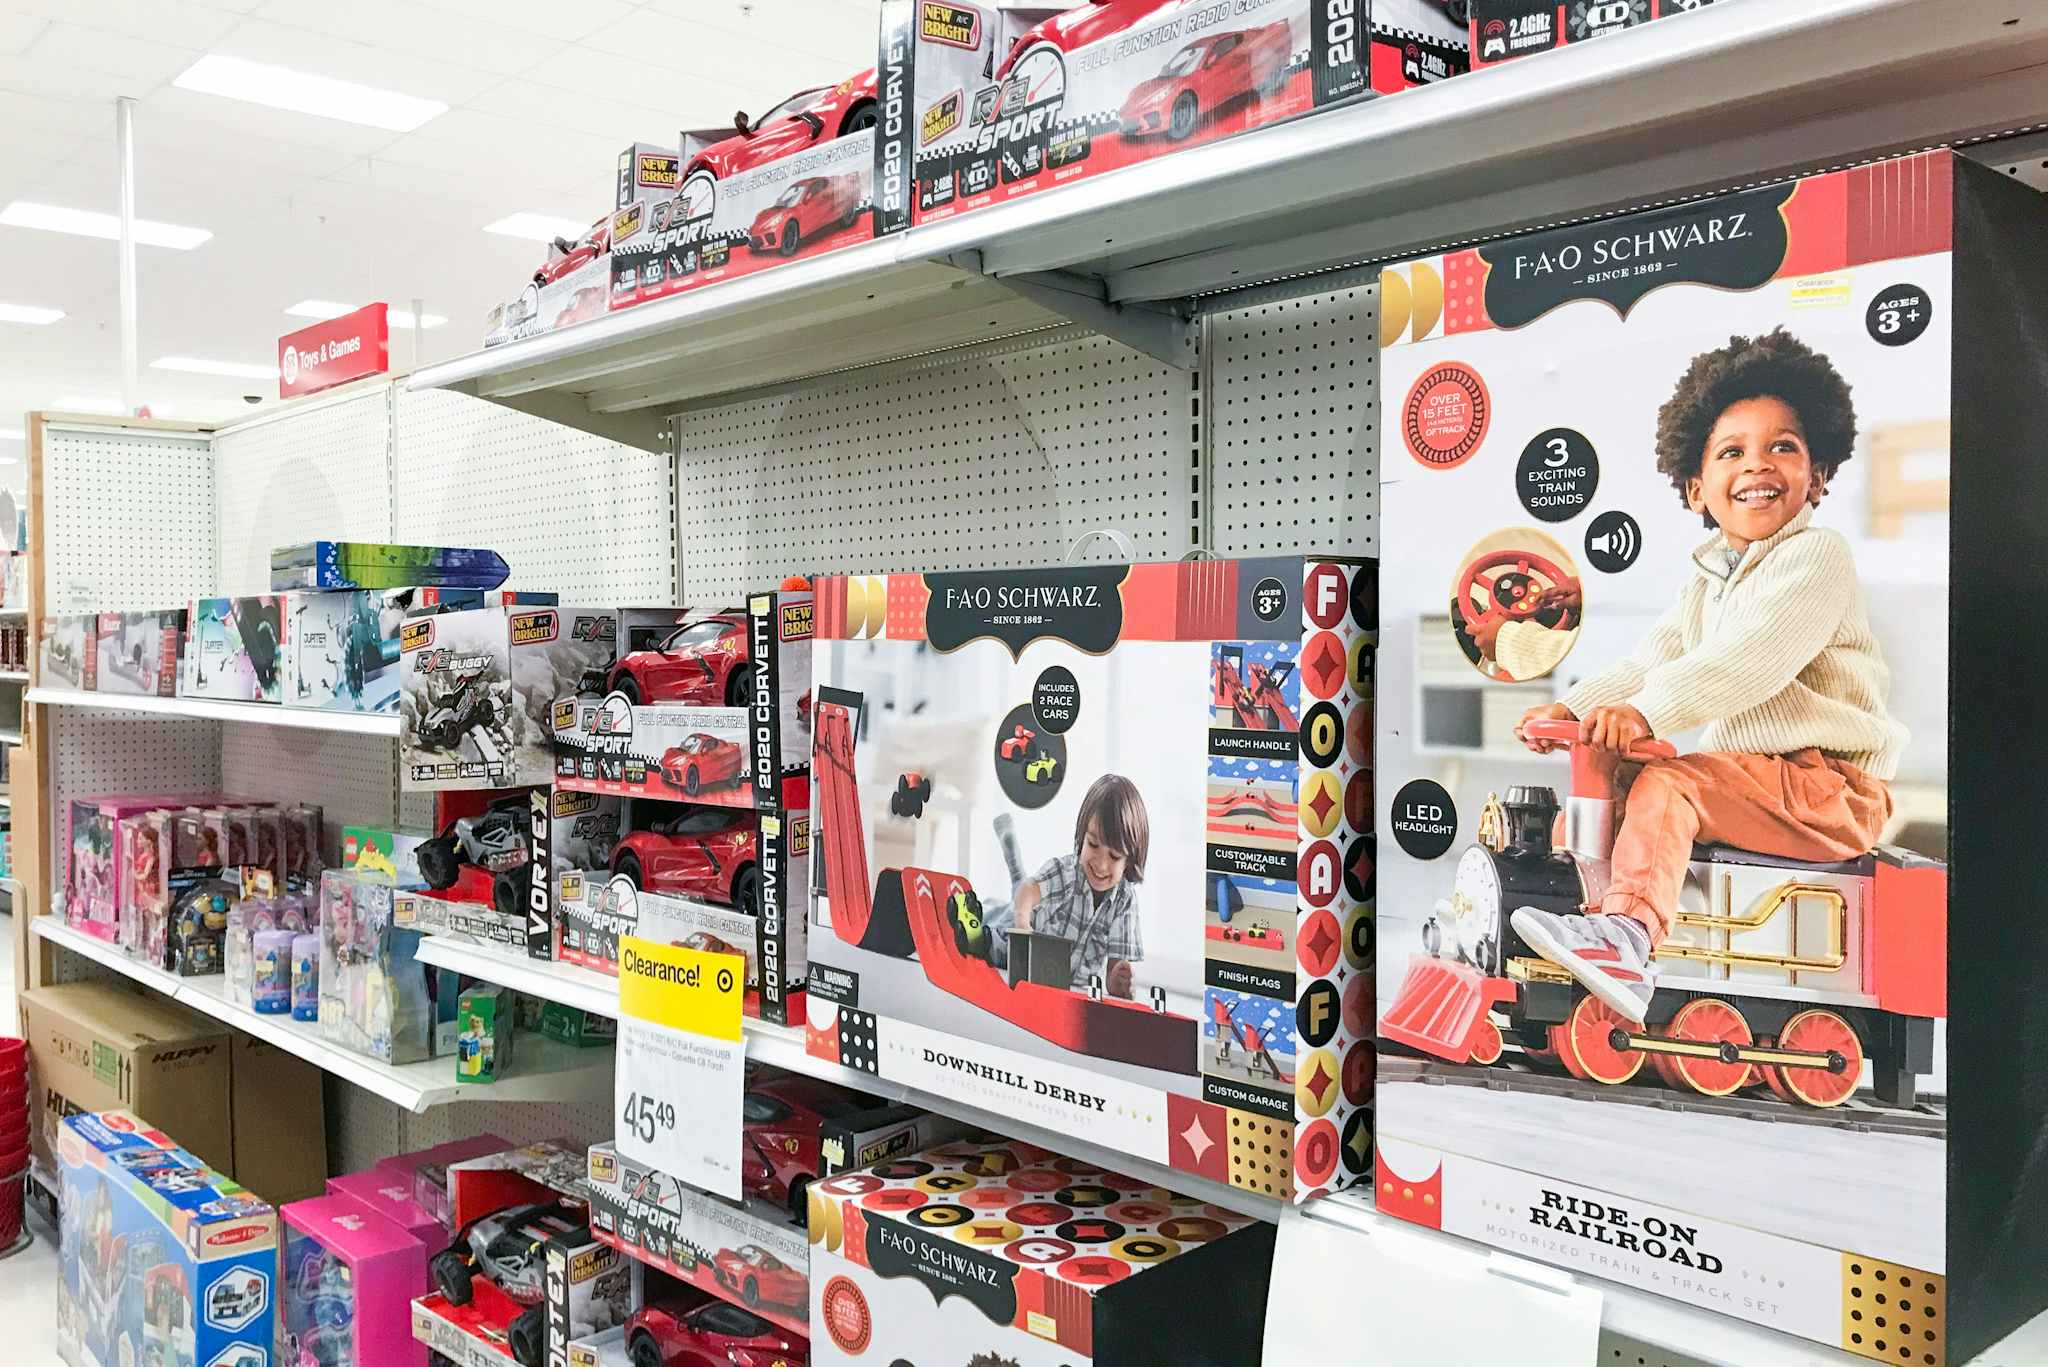 October Target Clearance: Toys, Clothing, Pool, Books, Crafts, and More